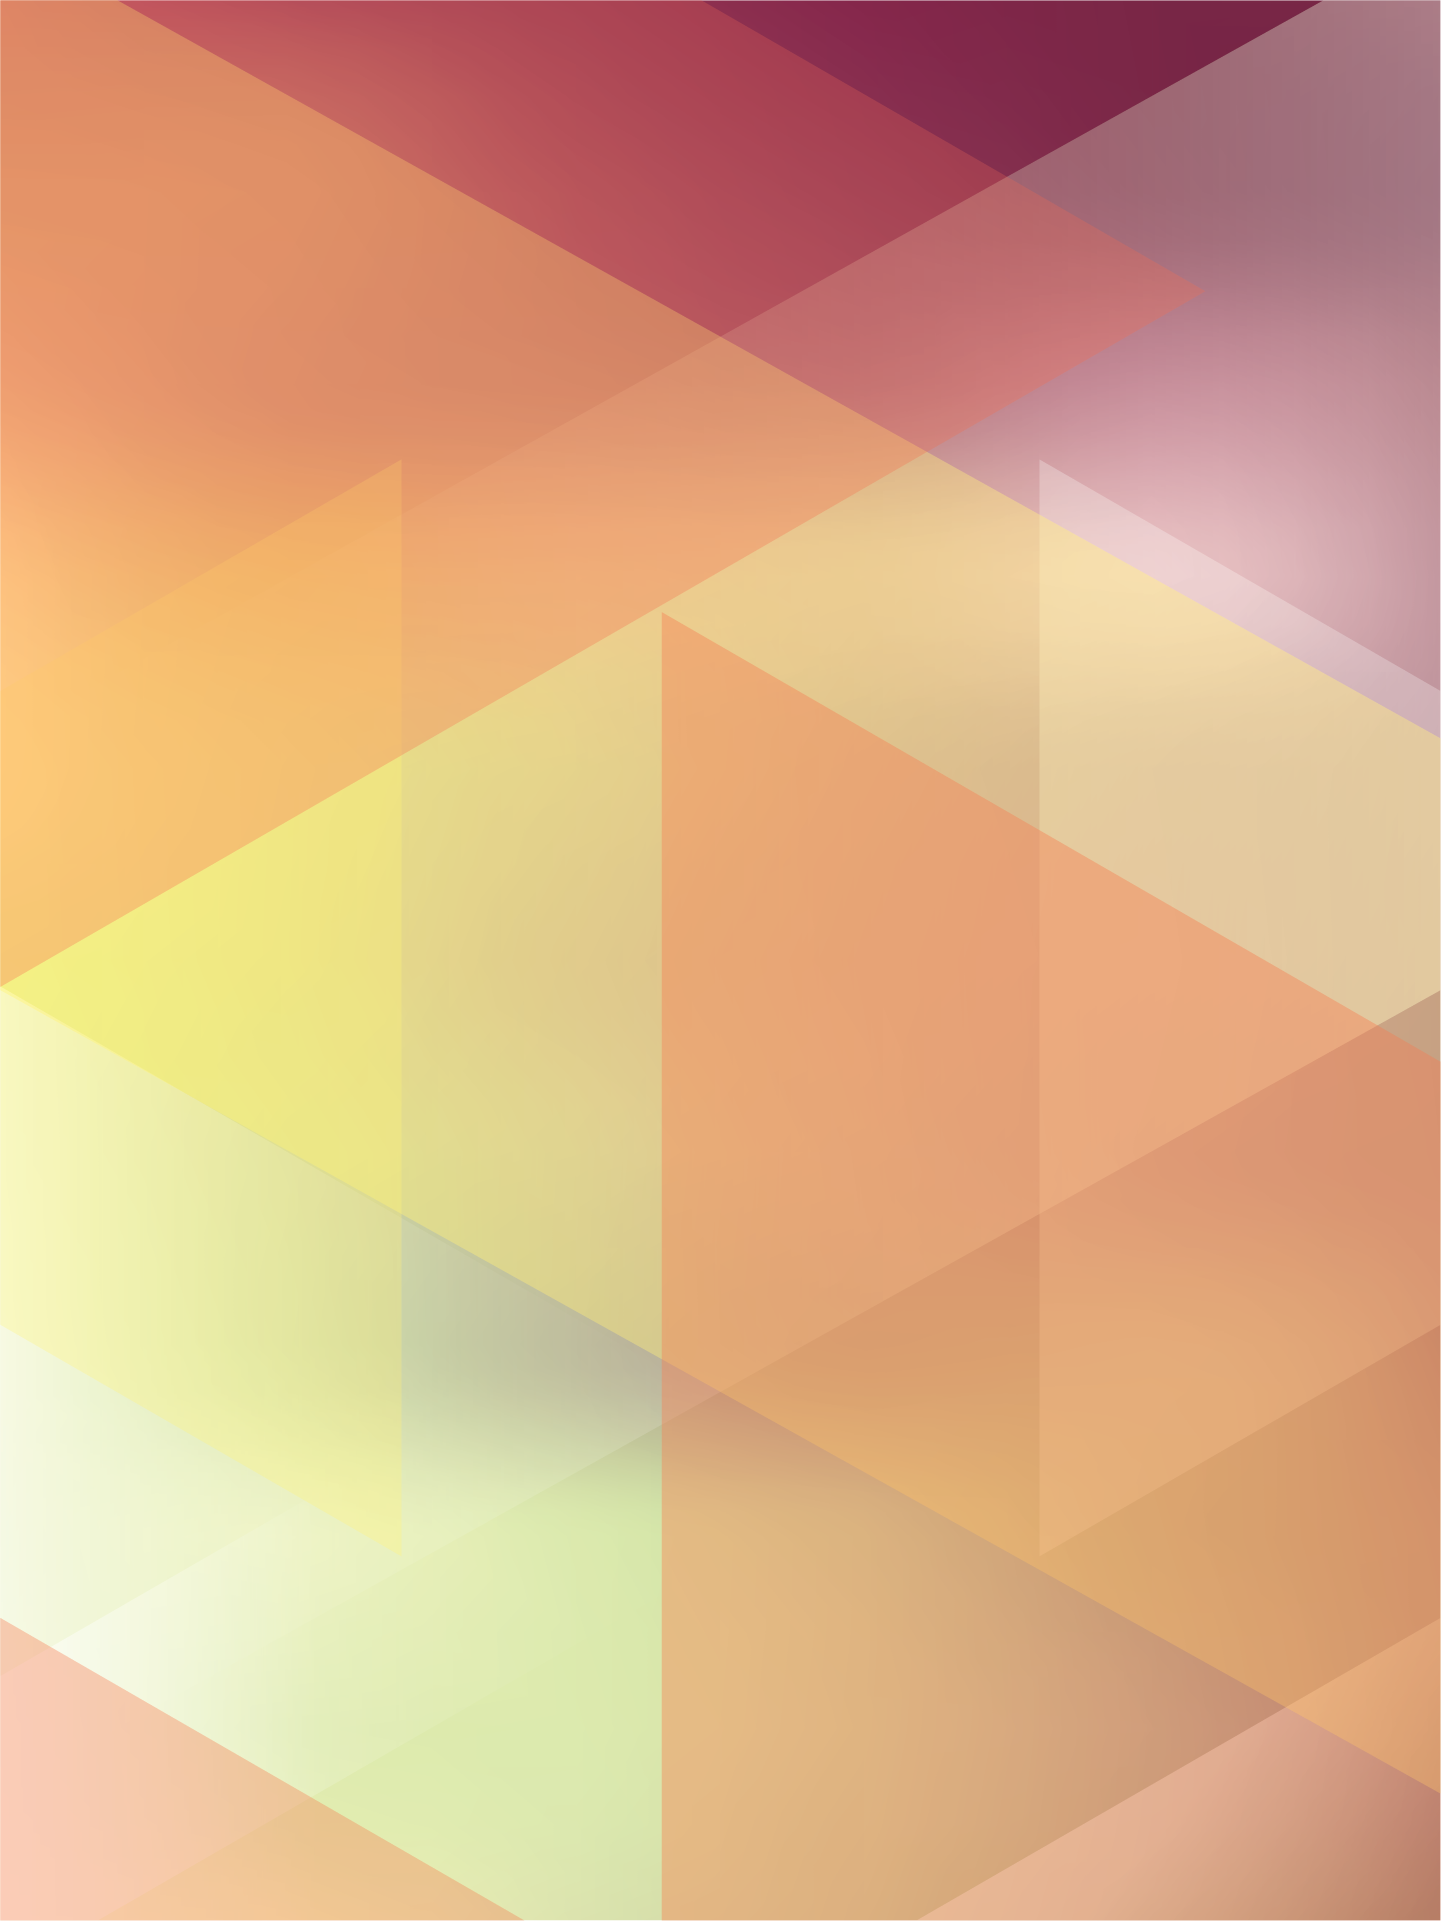 Colourful Prism Your Wallpaper Stock Illustration 1568876752  Shutterstock